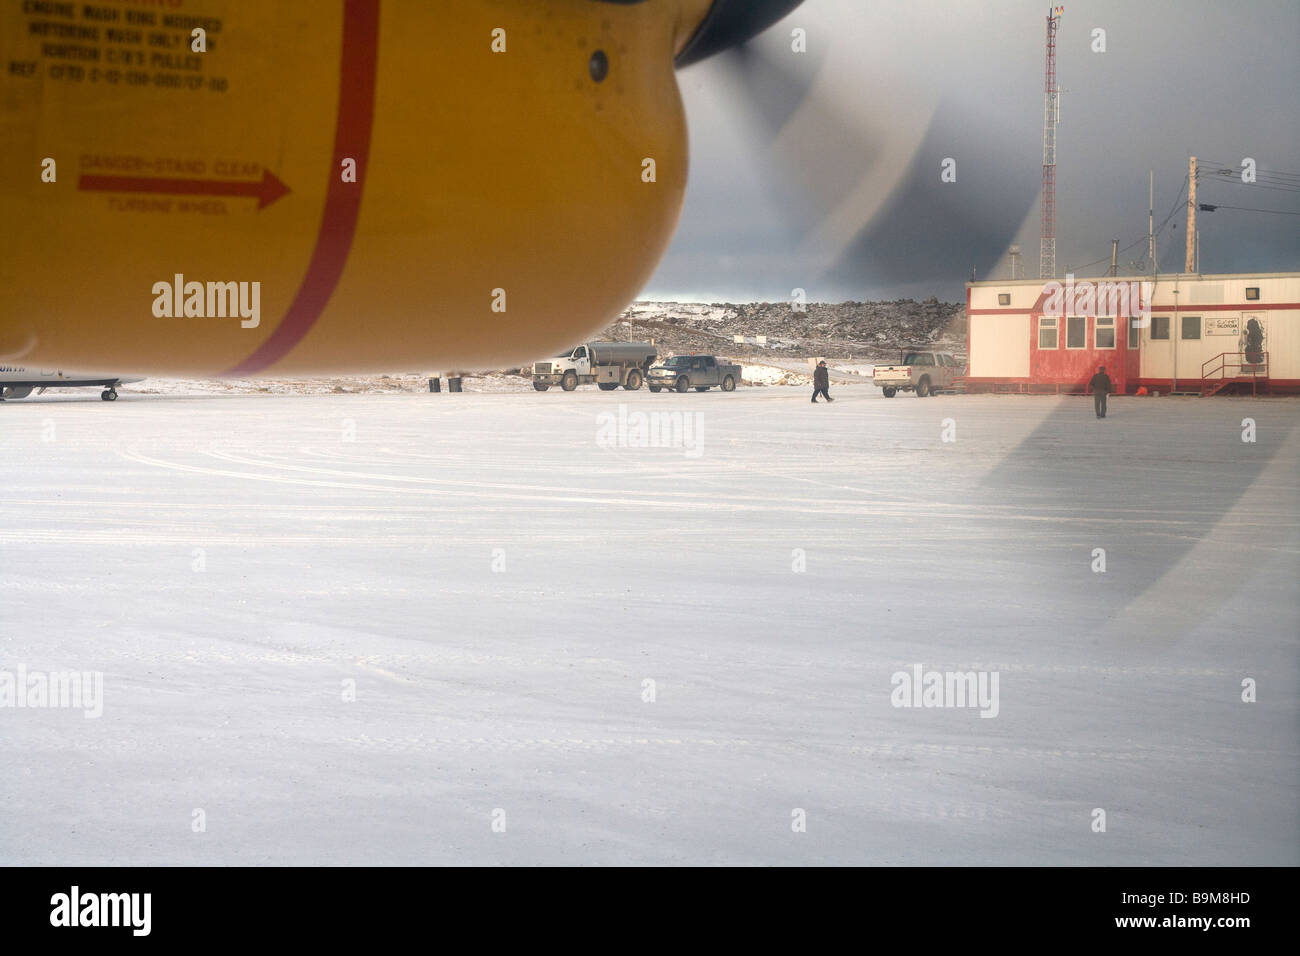 Snow covered airport runway with airplane propeller in motion, detail, Canadian Arctic, Canada Stock Photo